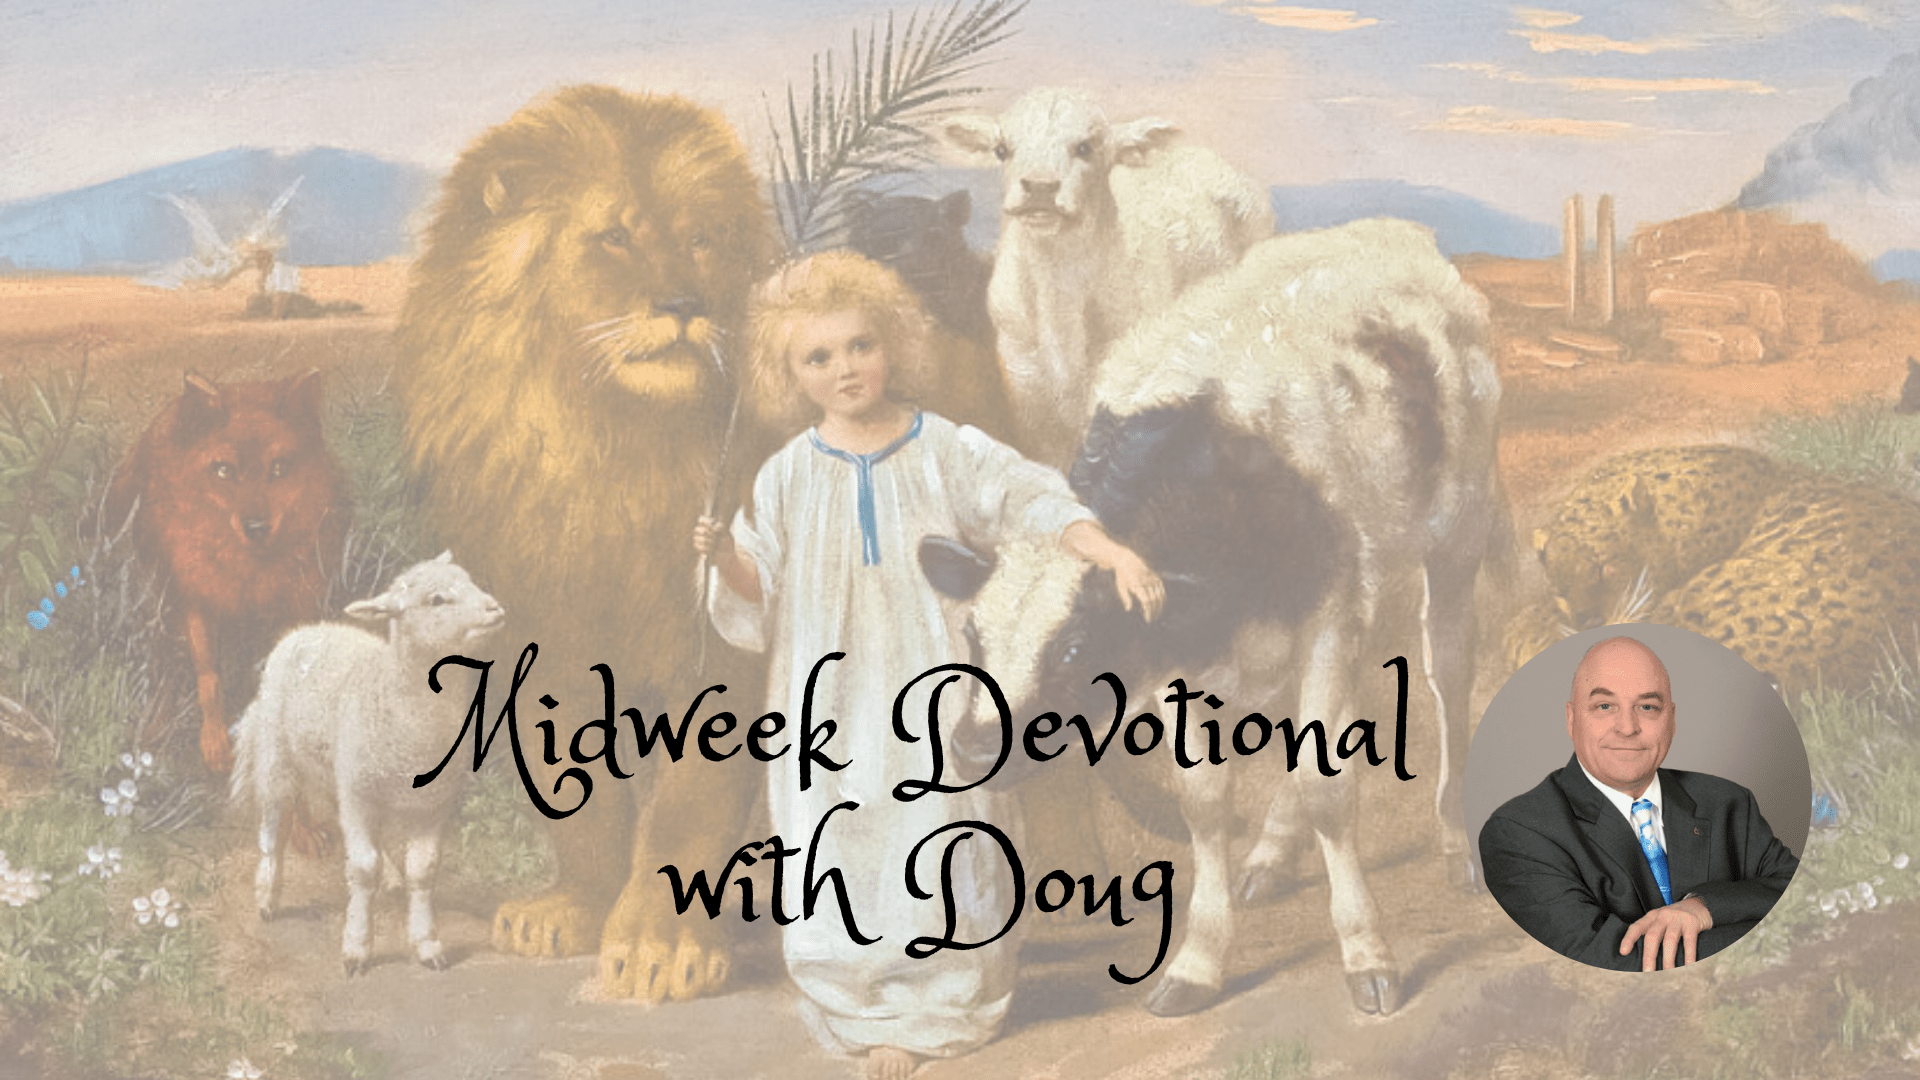 Midweek Devotional with Doug for fifth week of November